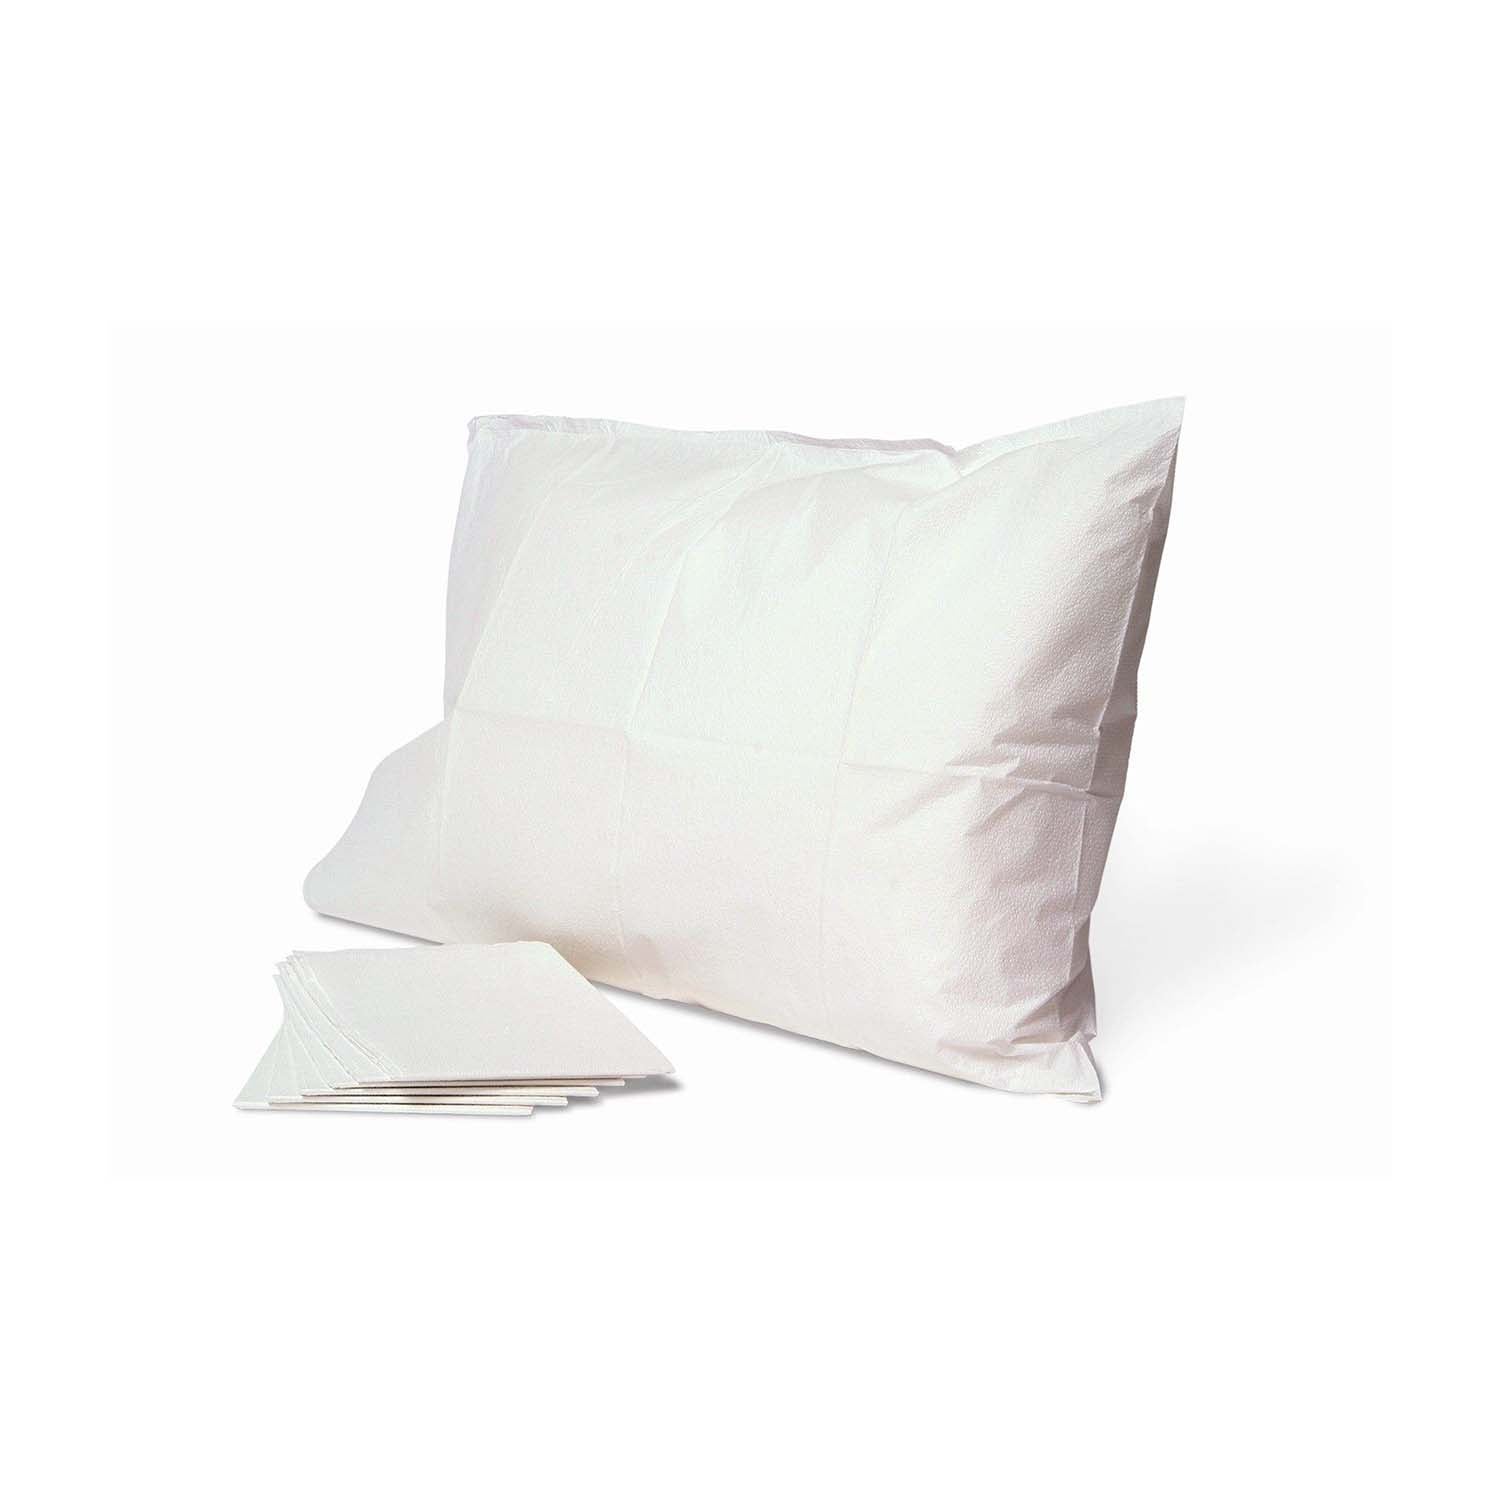 Pillow Cases | Pack of 50